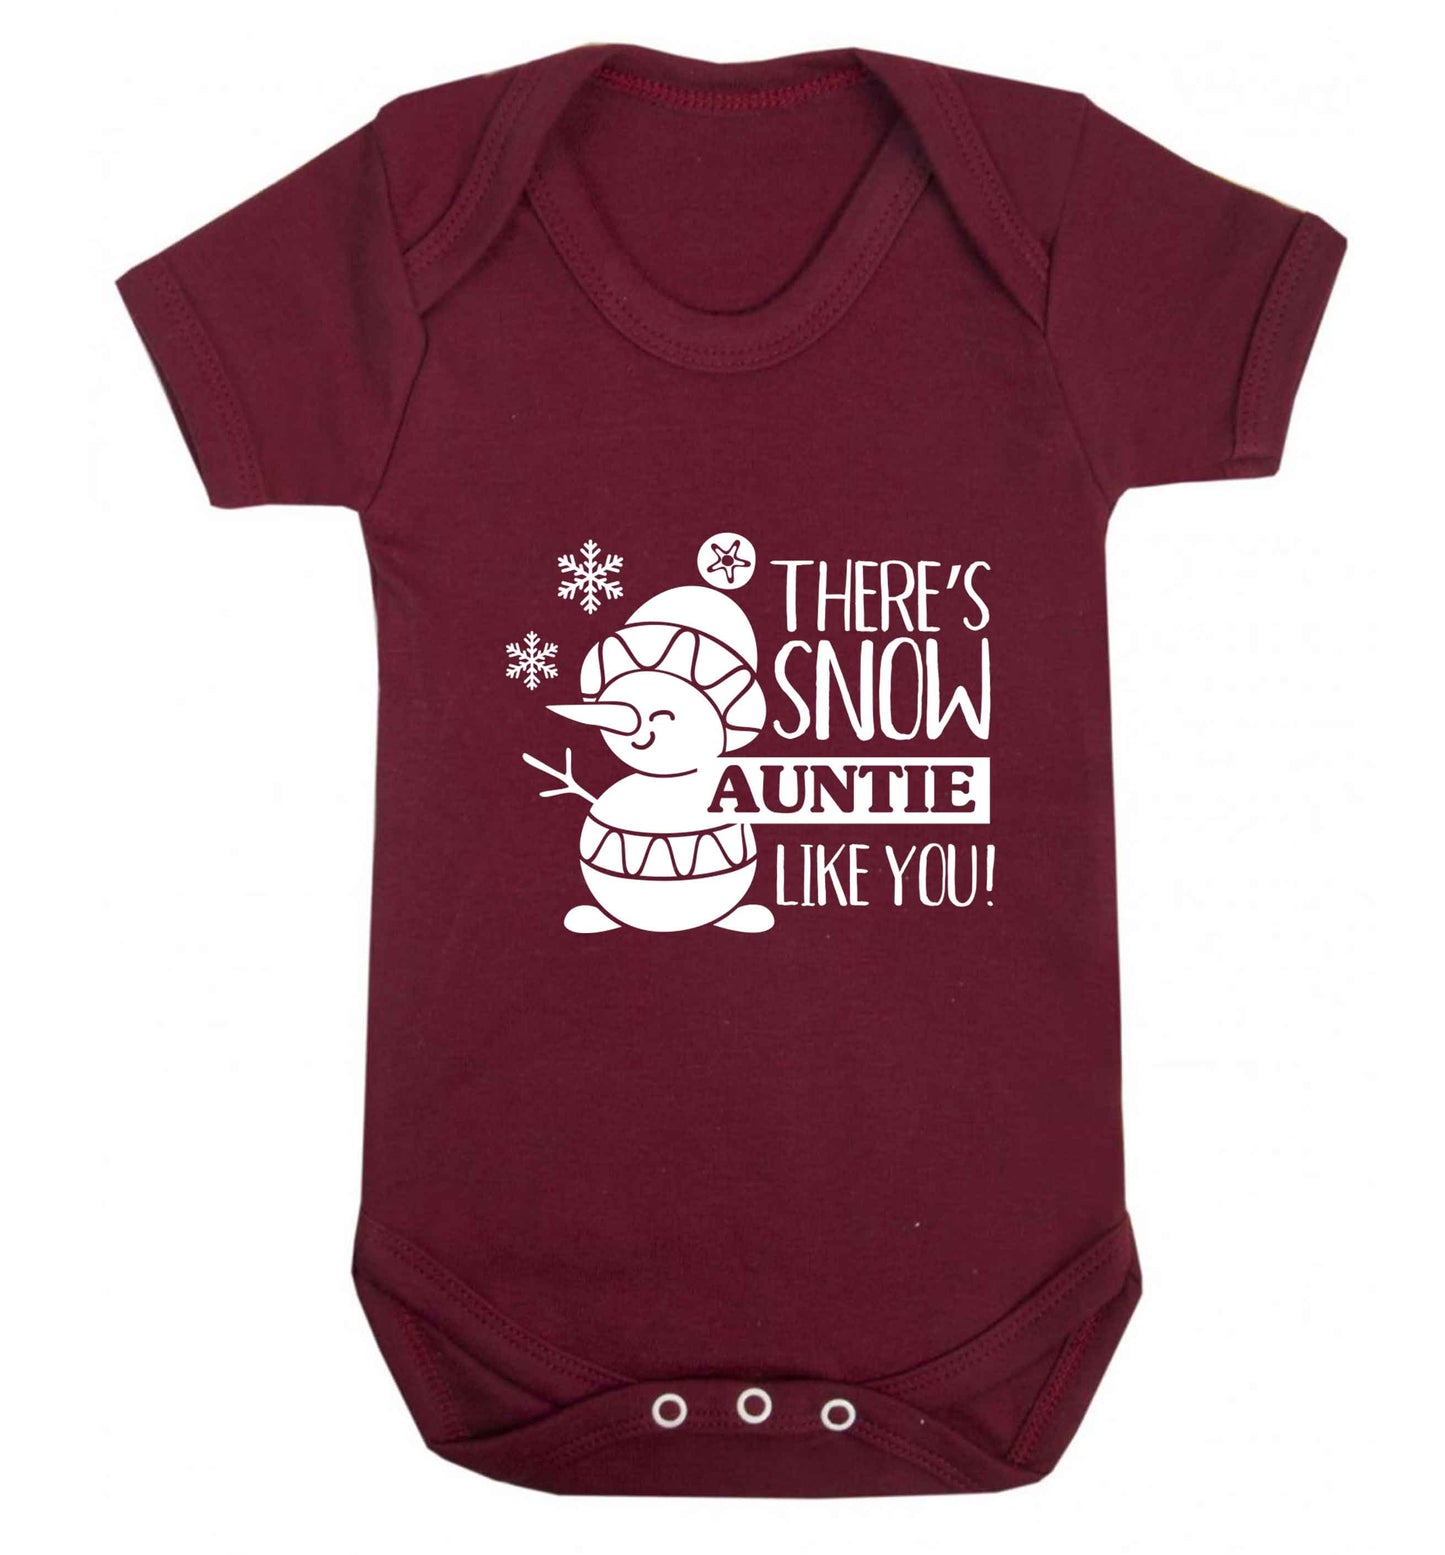 There's snow auntie like you baby vest maroon 18-24 months